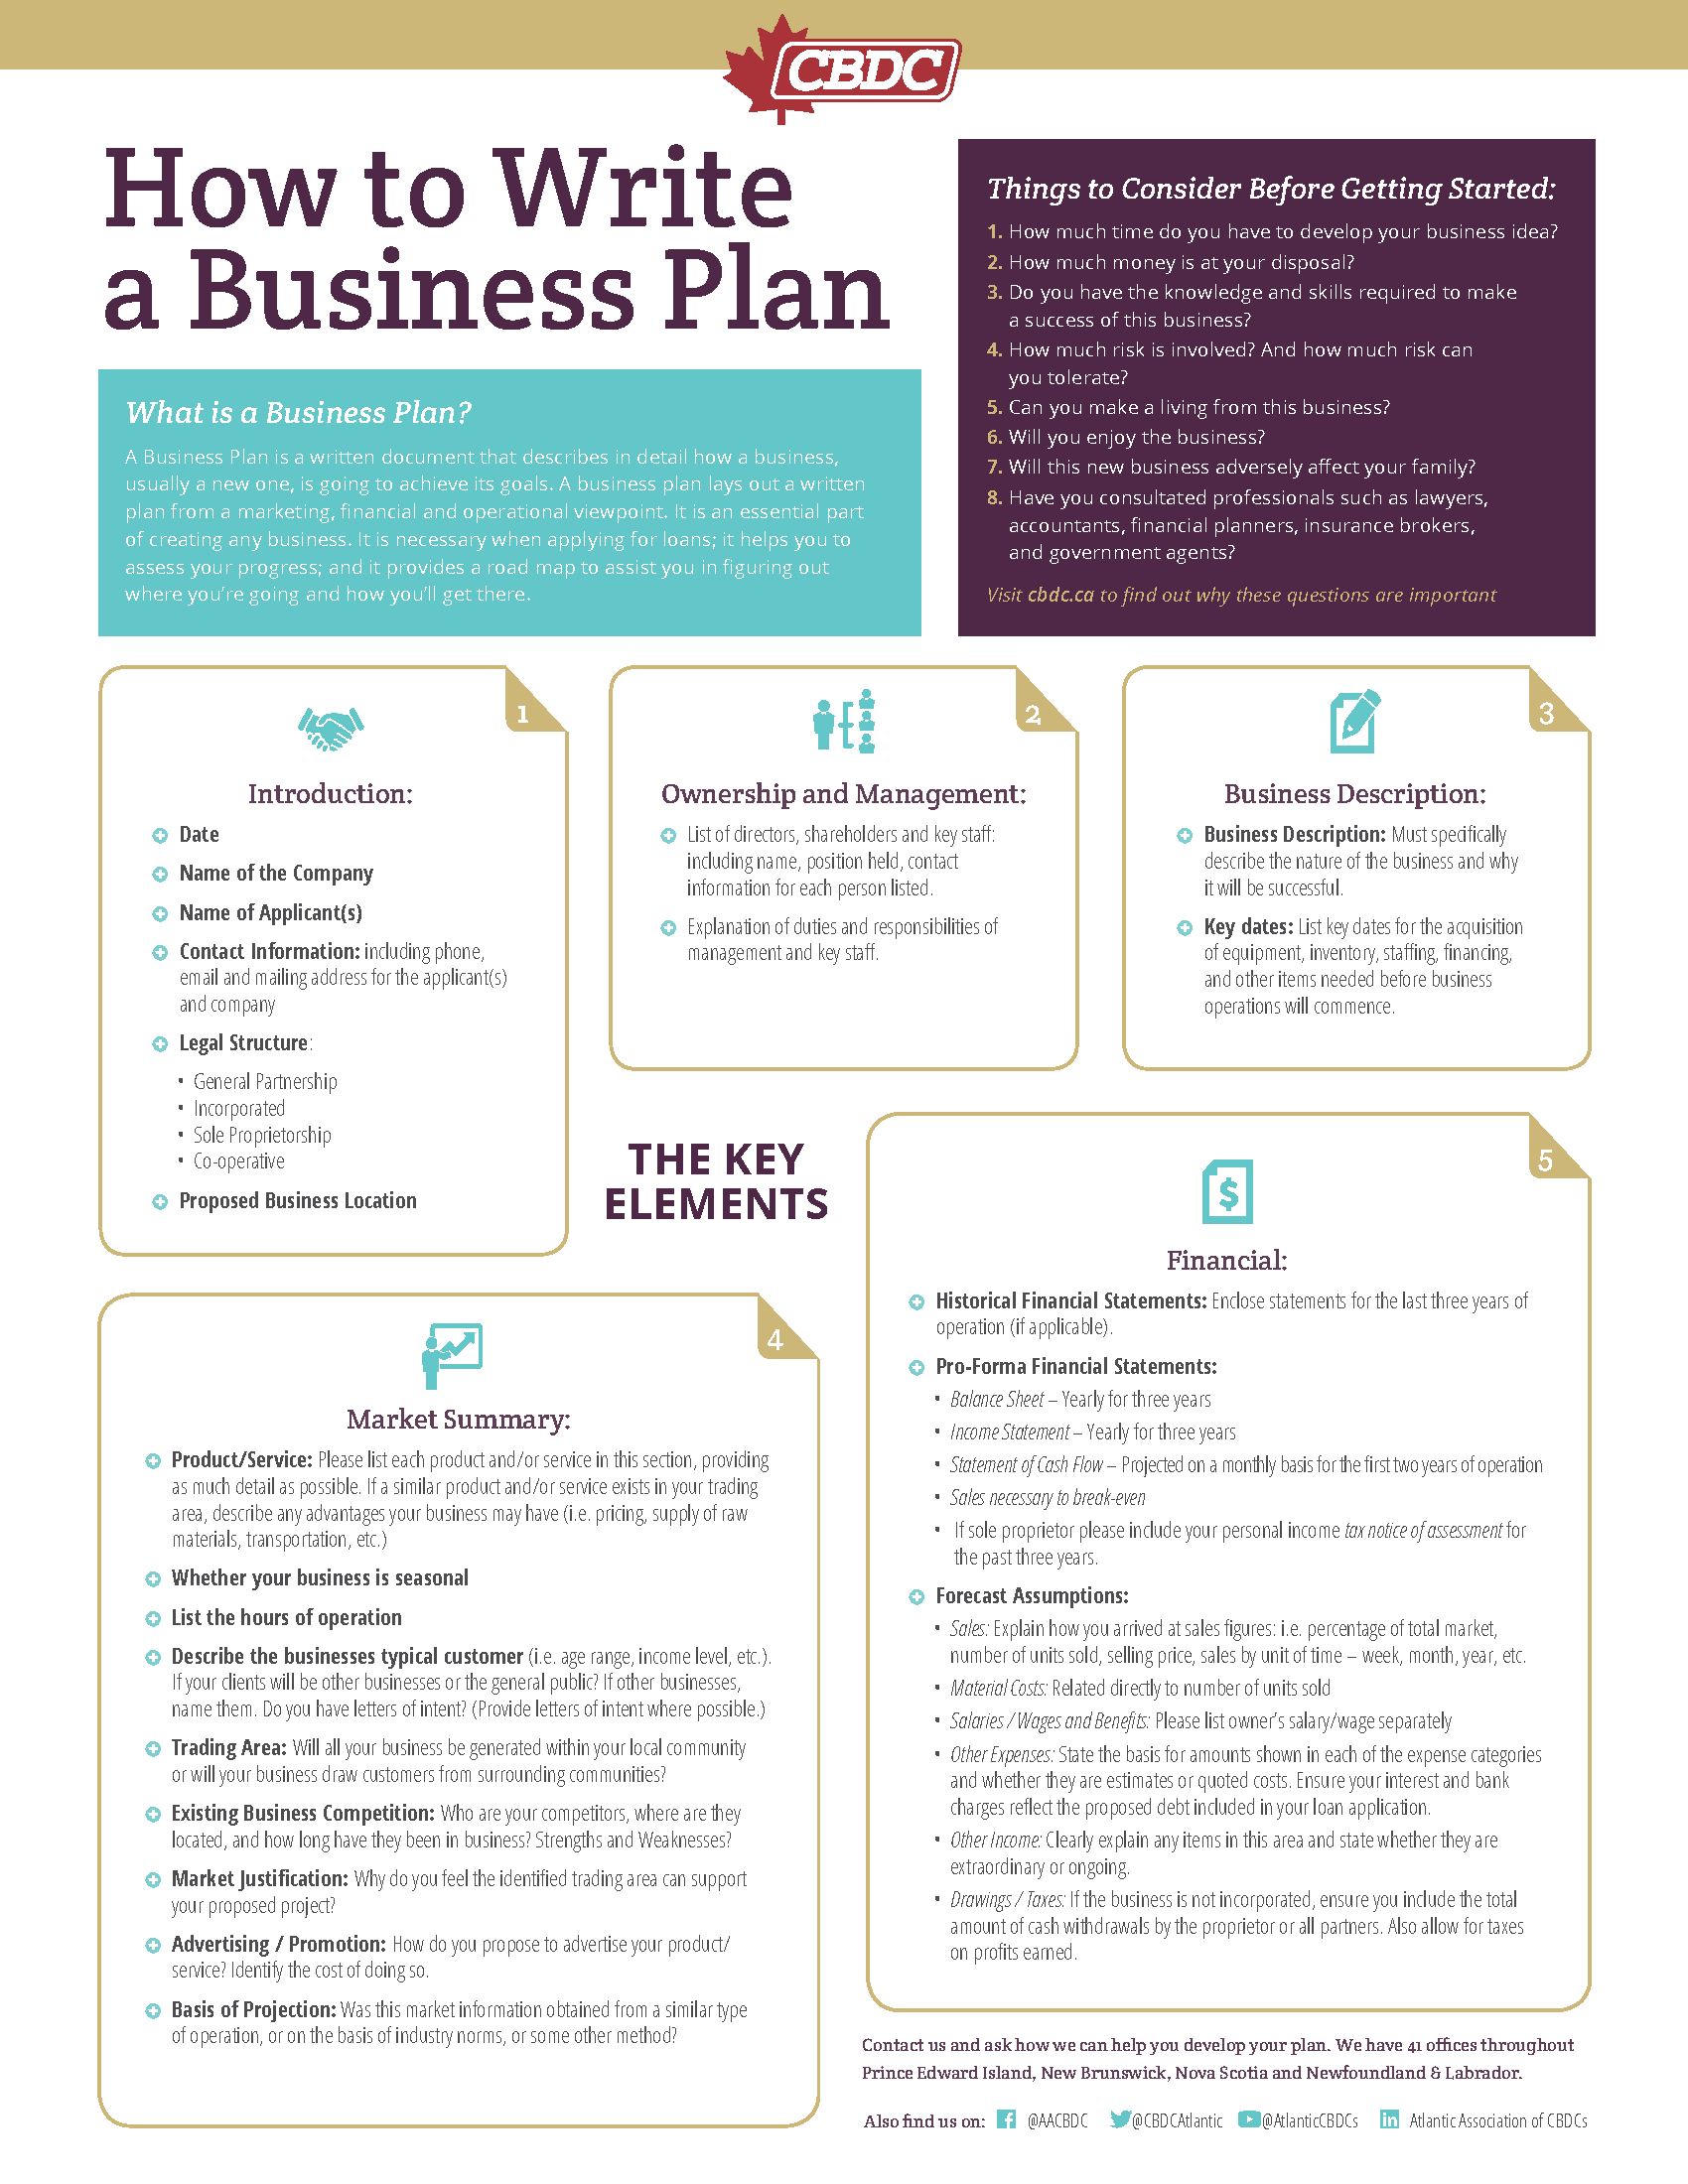 Business Plan Help for Small Business Owners